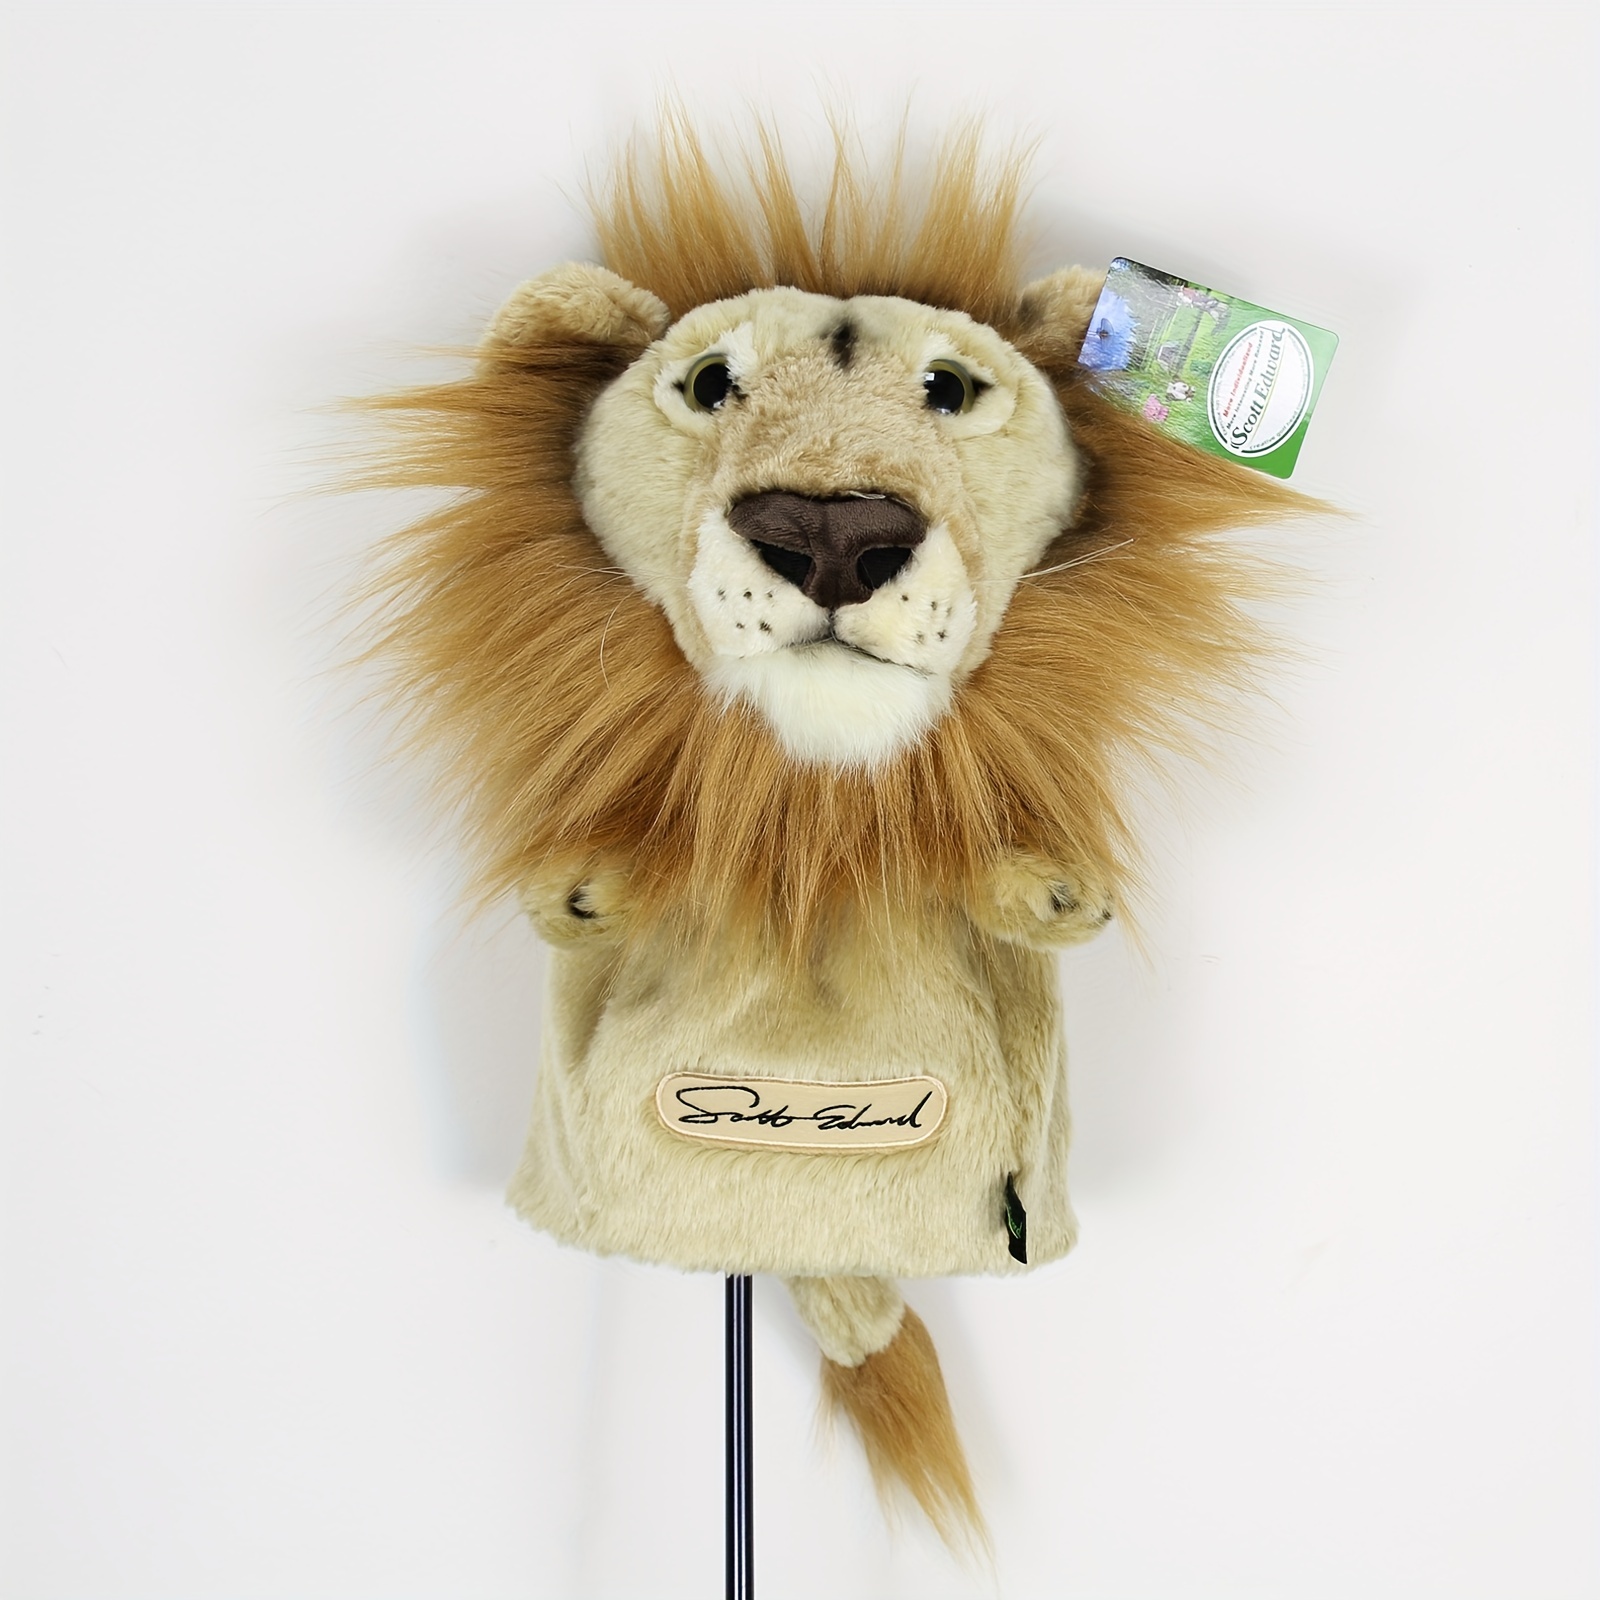 

Unique Animal Design Golf Club Covers - Add Fun & Functionality To Your Game!